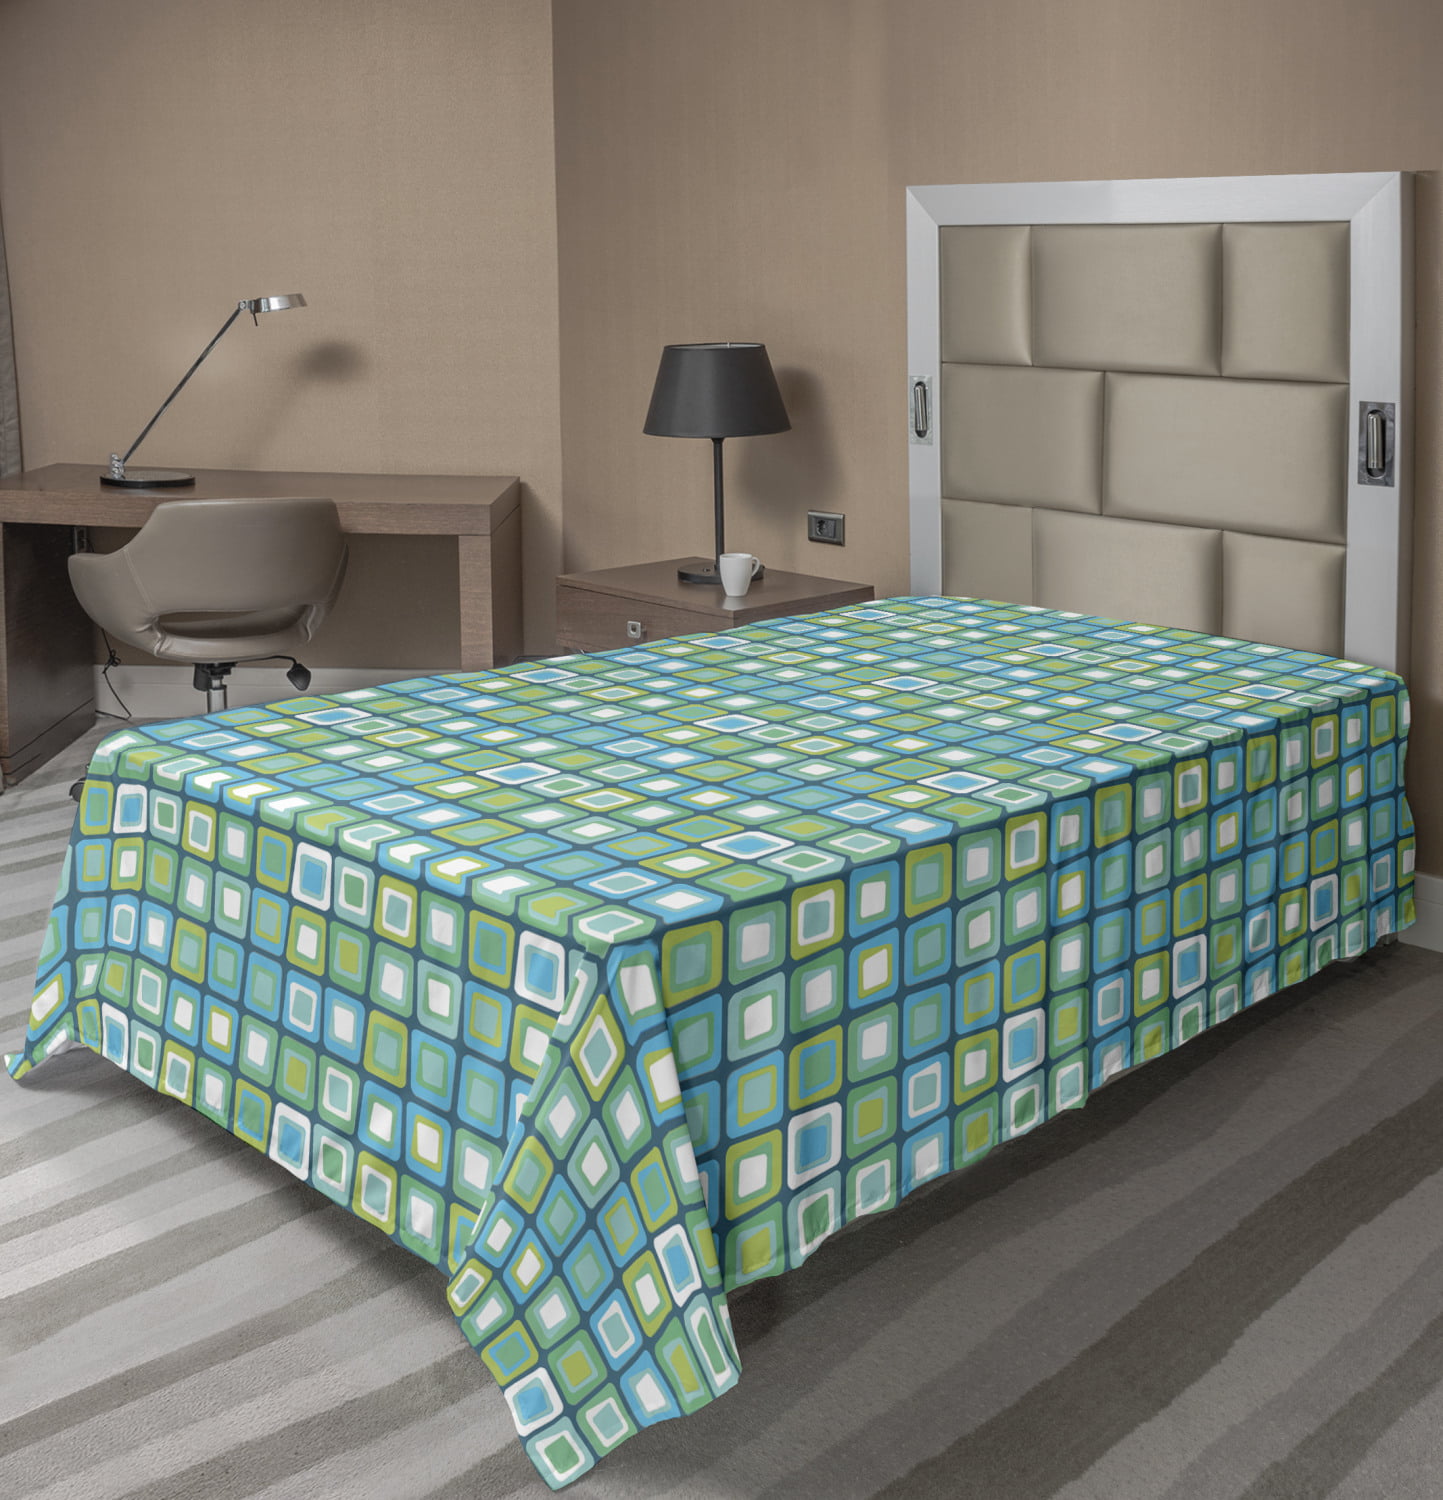 Details about   Ambesonne Geometrical Flat Sheet Top Sheet Decorative Bedding 6 Sizes